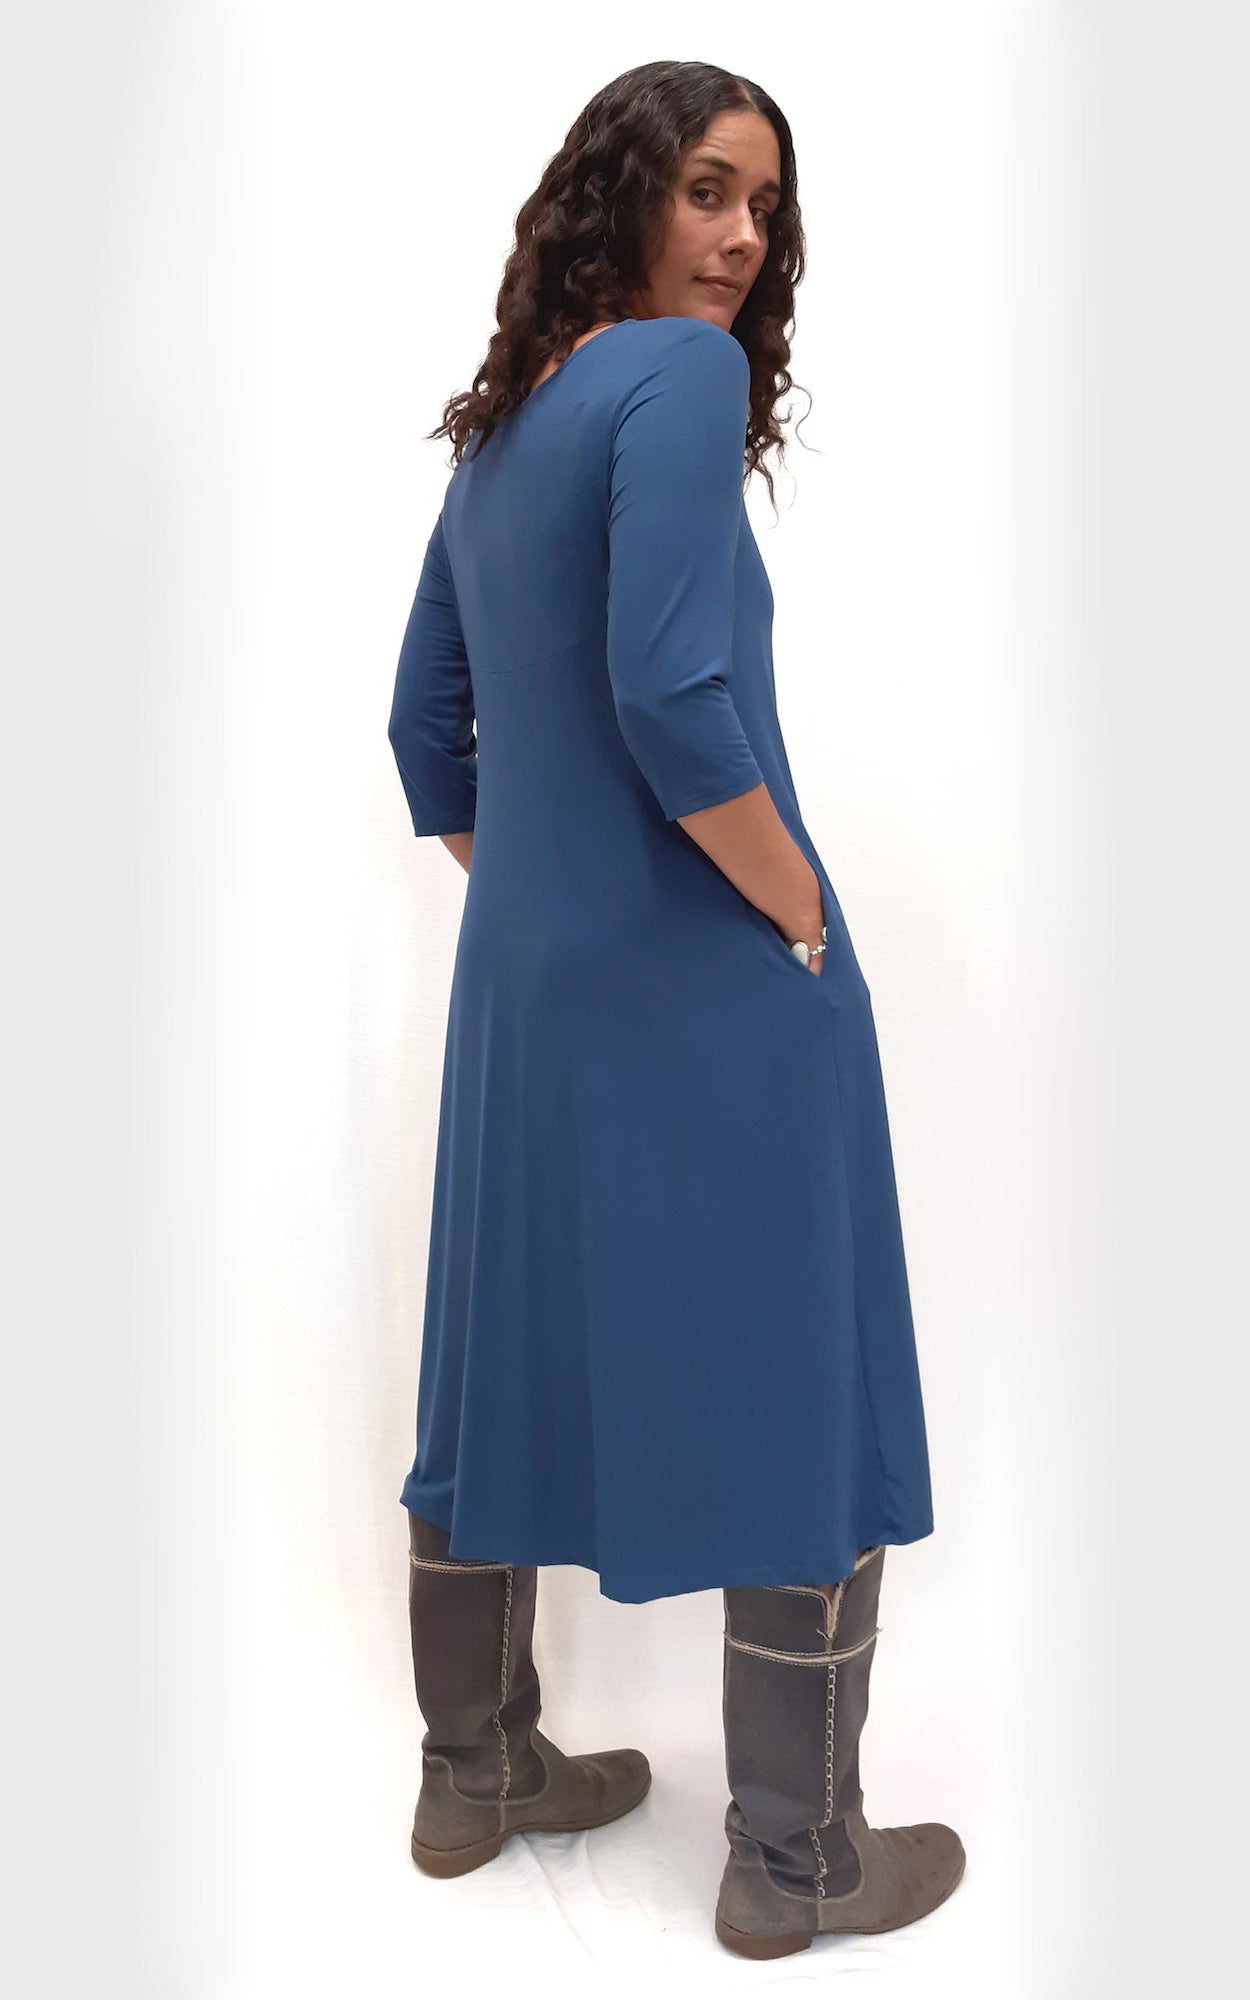 Bamboo 3/4 Sleeve Long Tunic Dress with side pockets - Captain Blue 